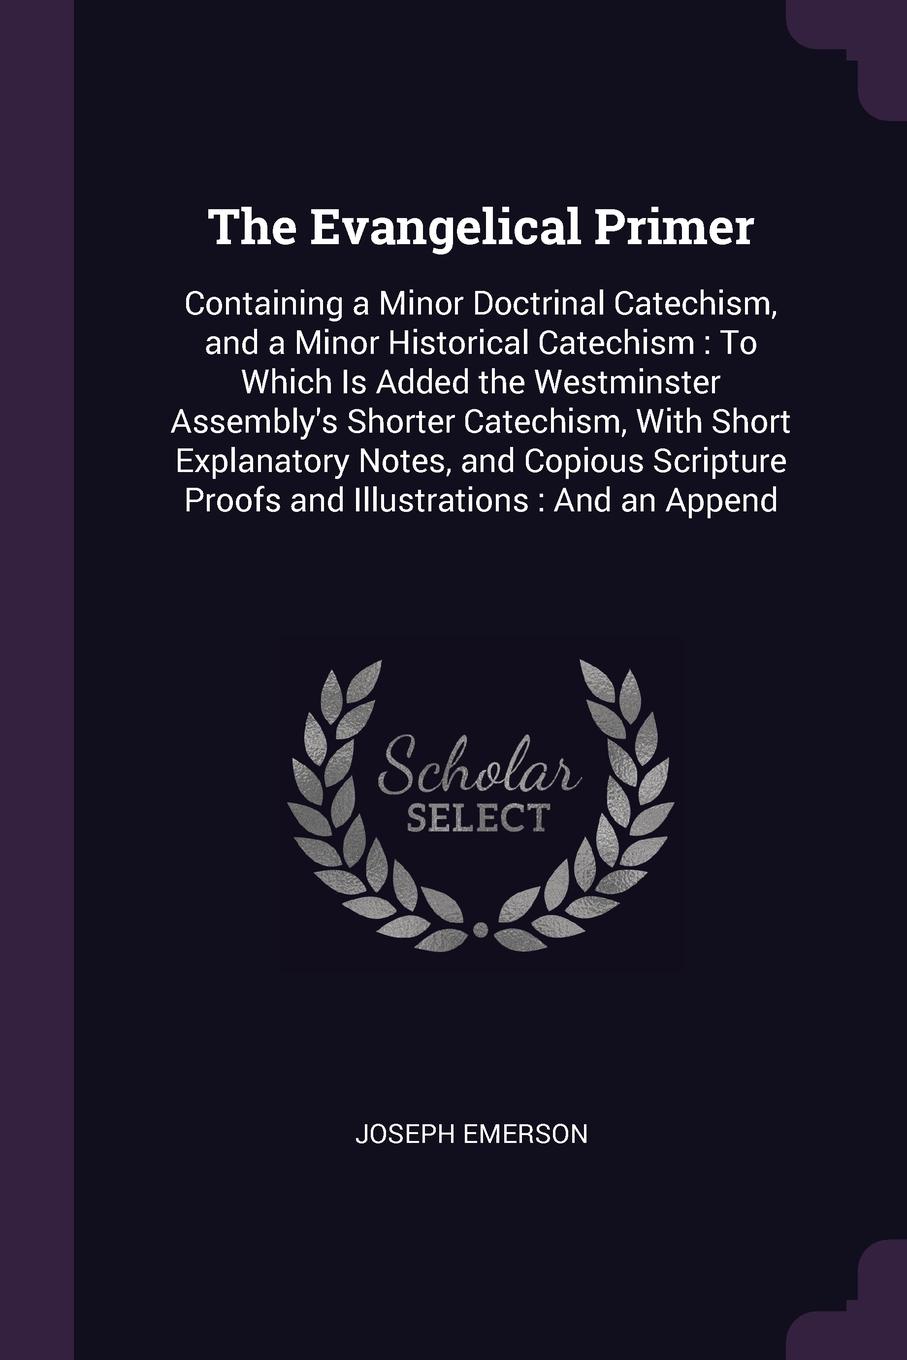 The Evangelical Primer. Containing a Minor Doctrinal Catechism, and a Minor Historical Catechism : To Which Is Added the Westminster Assembly`s Shorter Catechism, With Short Explanatory Notes, and Copious Scripture Proofs and Illustrations : And a...